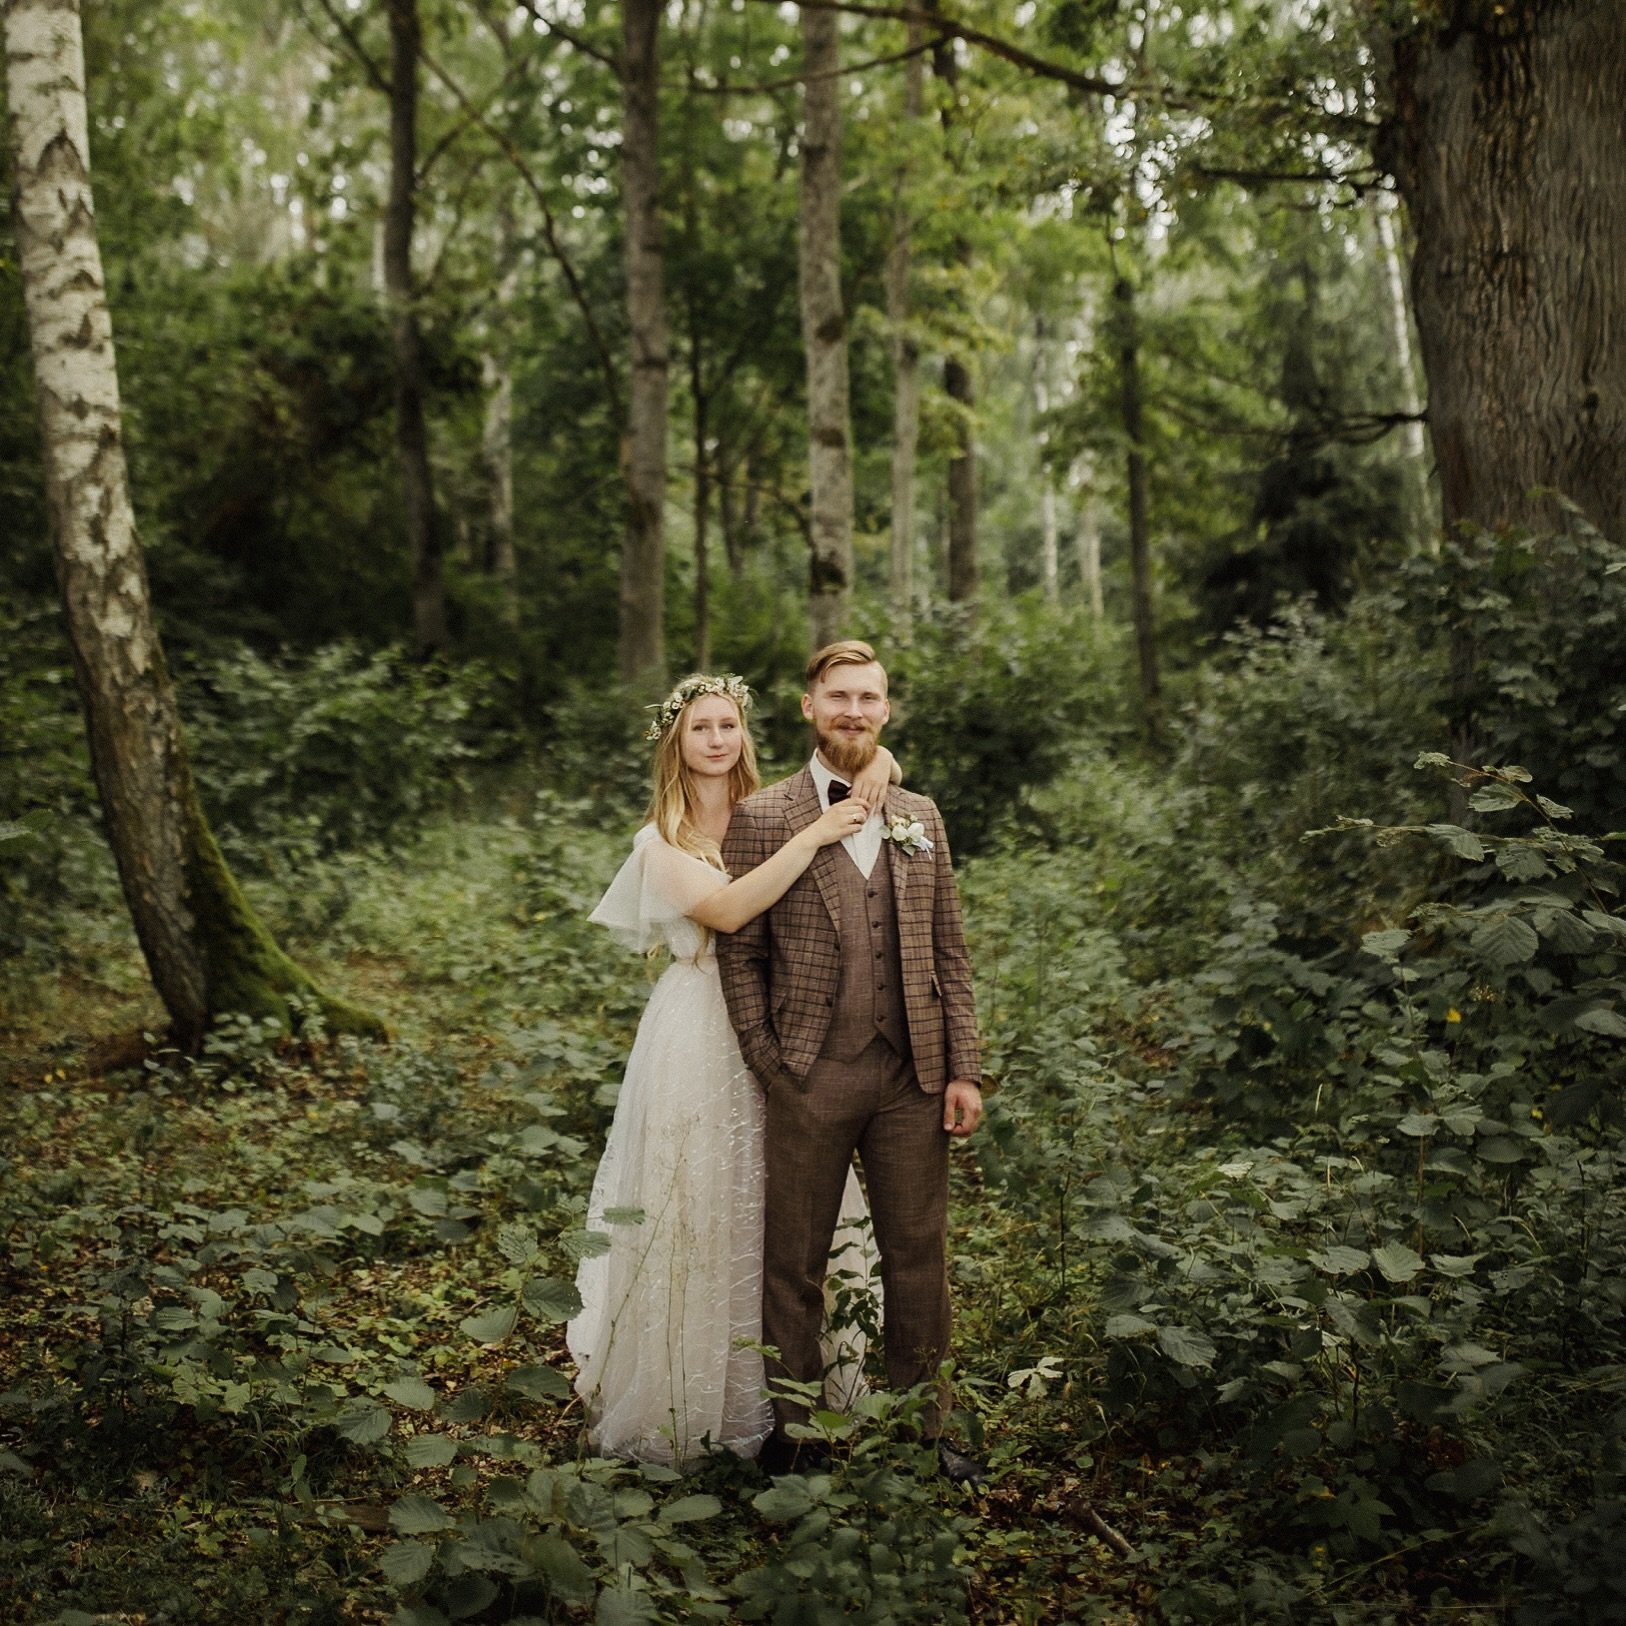 &ldquo;Like a scene straight out of a fairytale, our love story unfolds in the enchanted forest.&rdquo;

#kāzas #fotogrāfs #kāzufotogrāfs